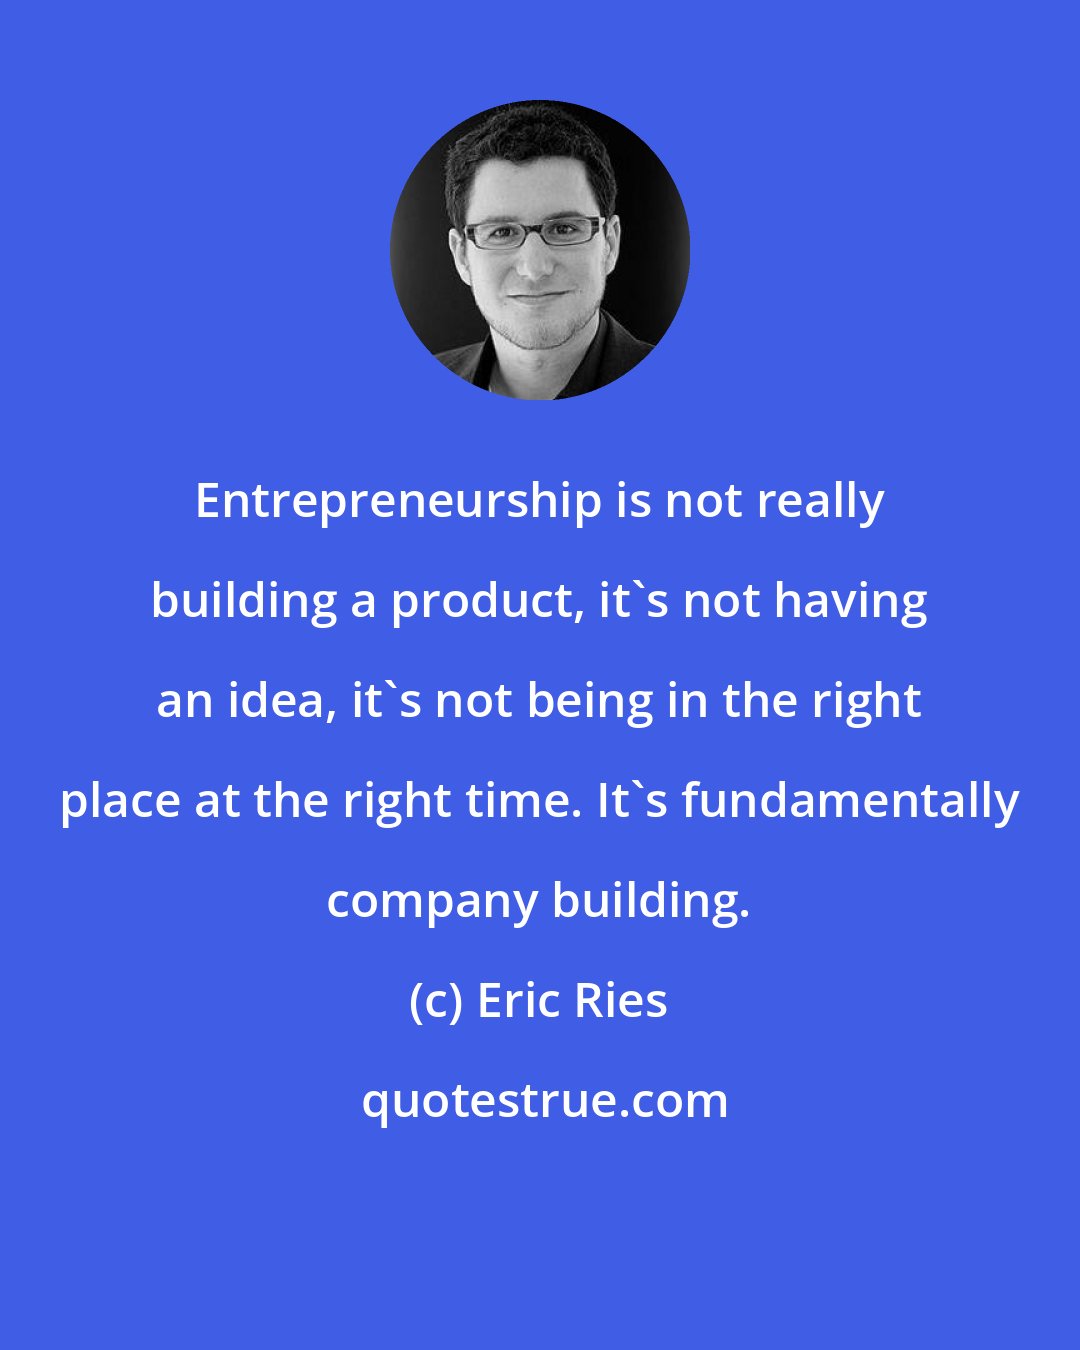 Eric Ries: Entrepreneurship is not really building a product, it's not having an idea, it's not being in the right place at the right time. It's fundamentally company building.